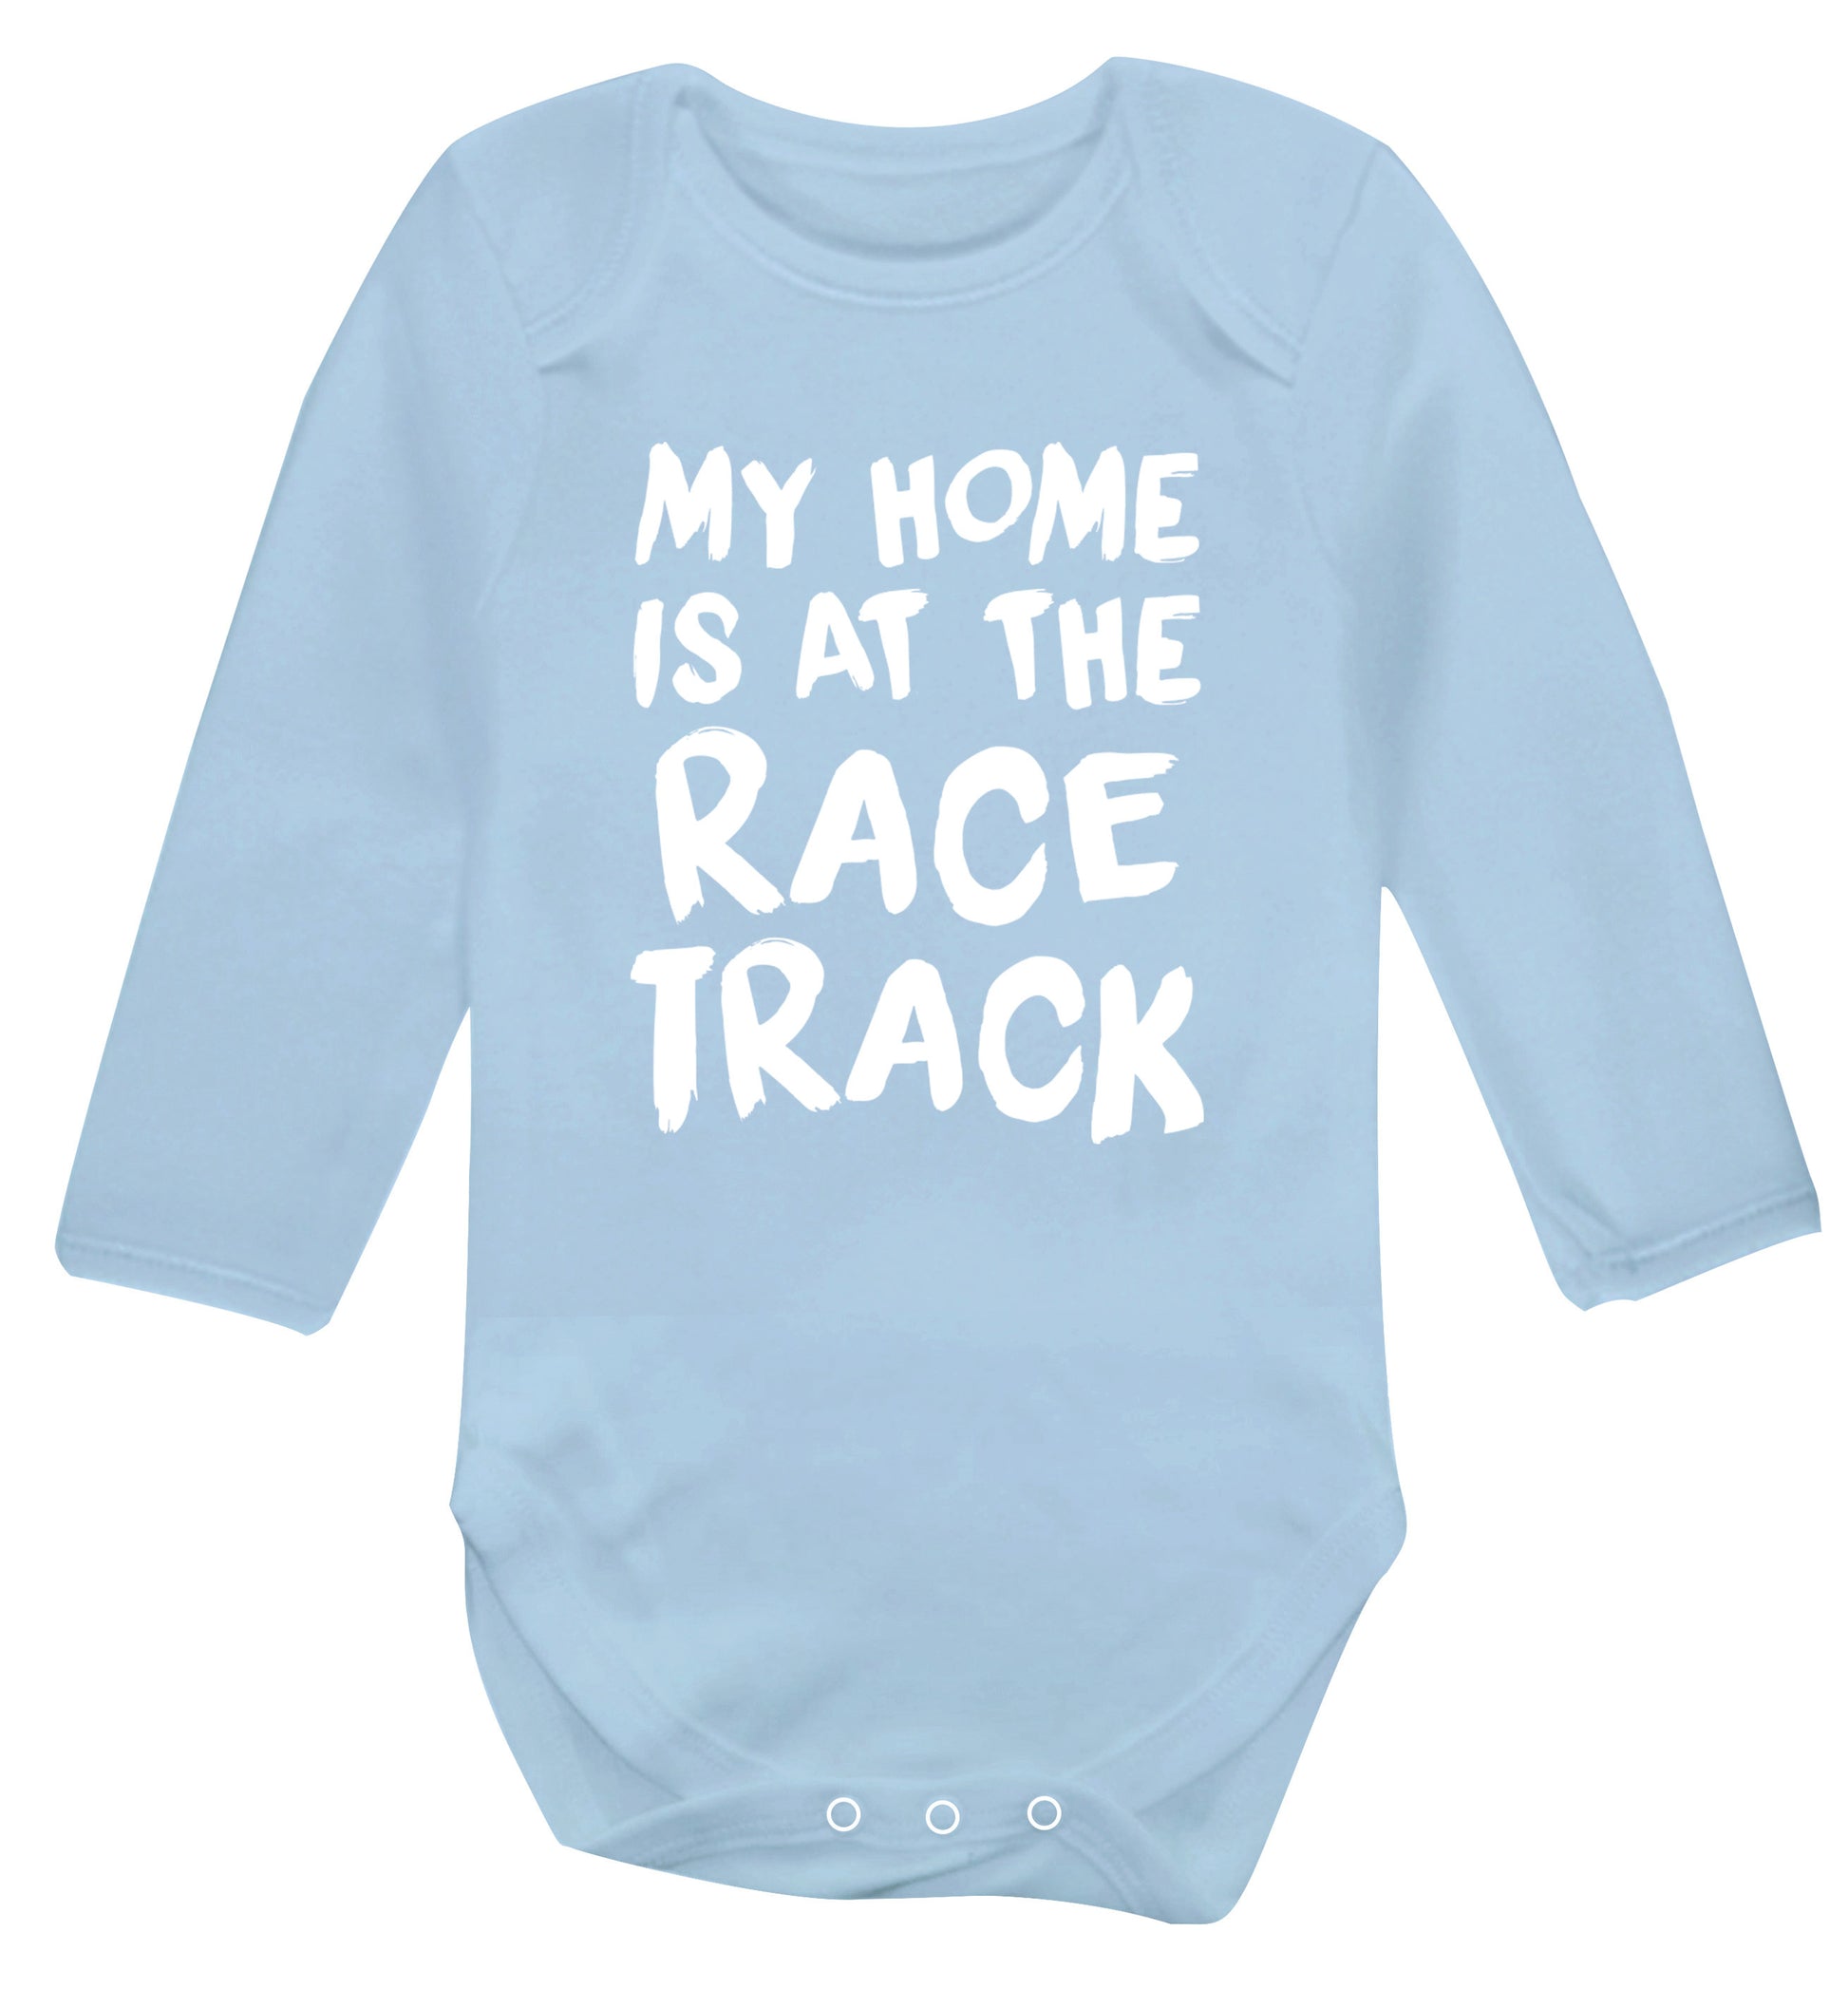 My home is at the race track Baby Vest long sleeved pale blue 6-12 months